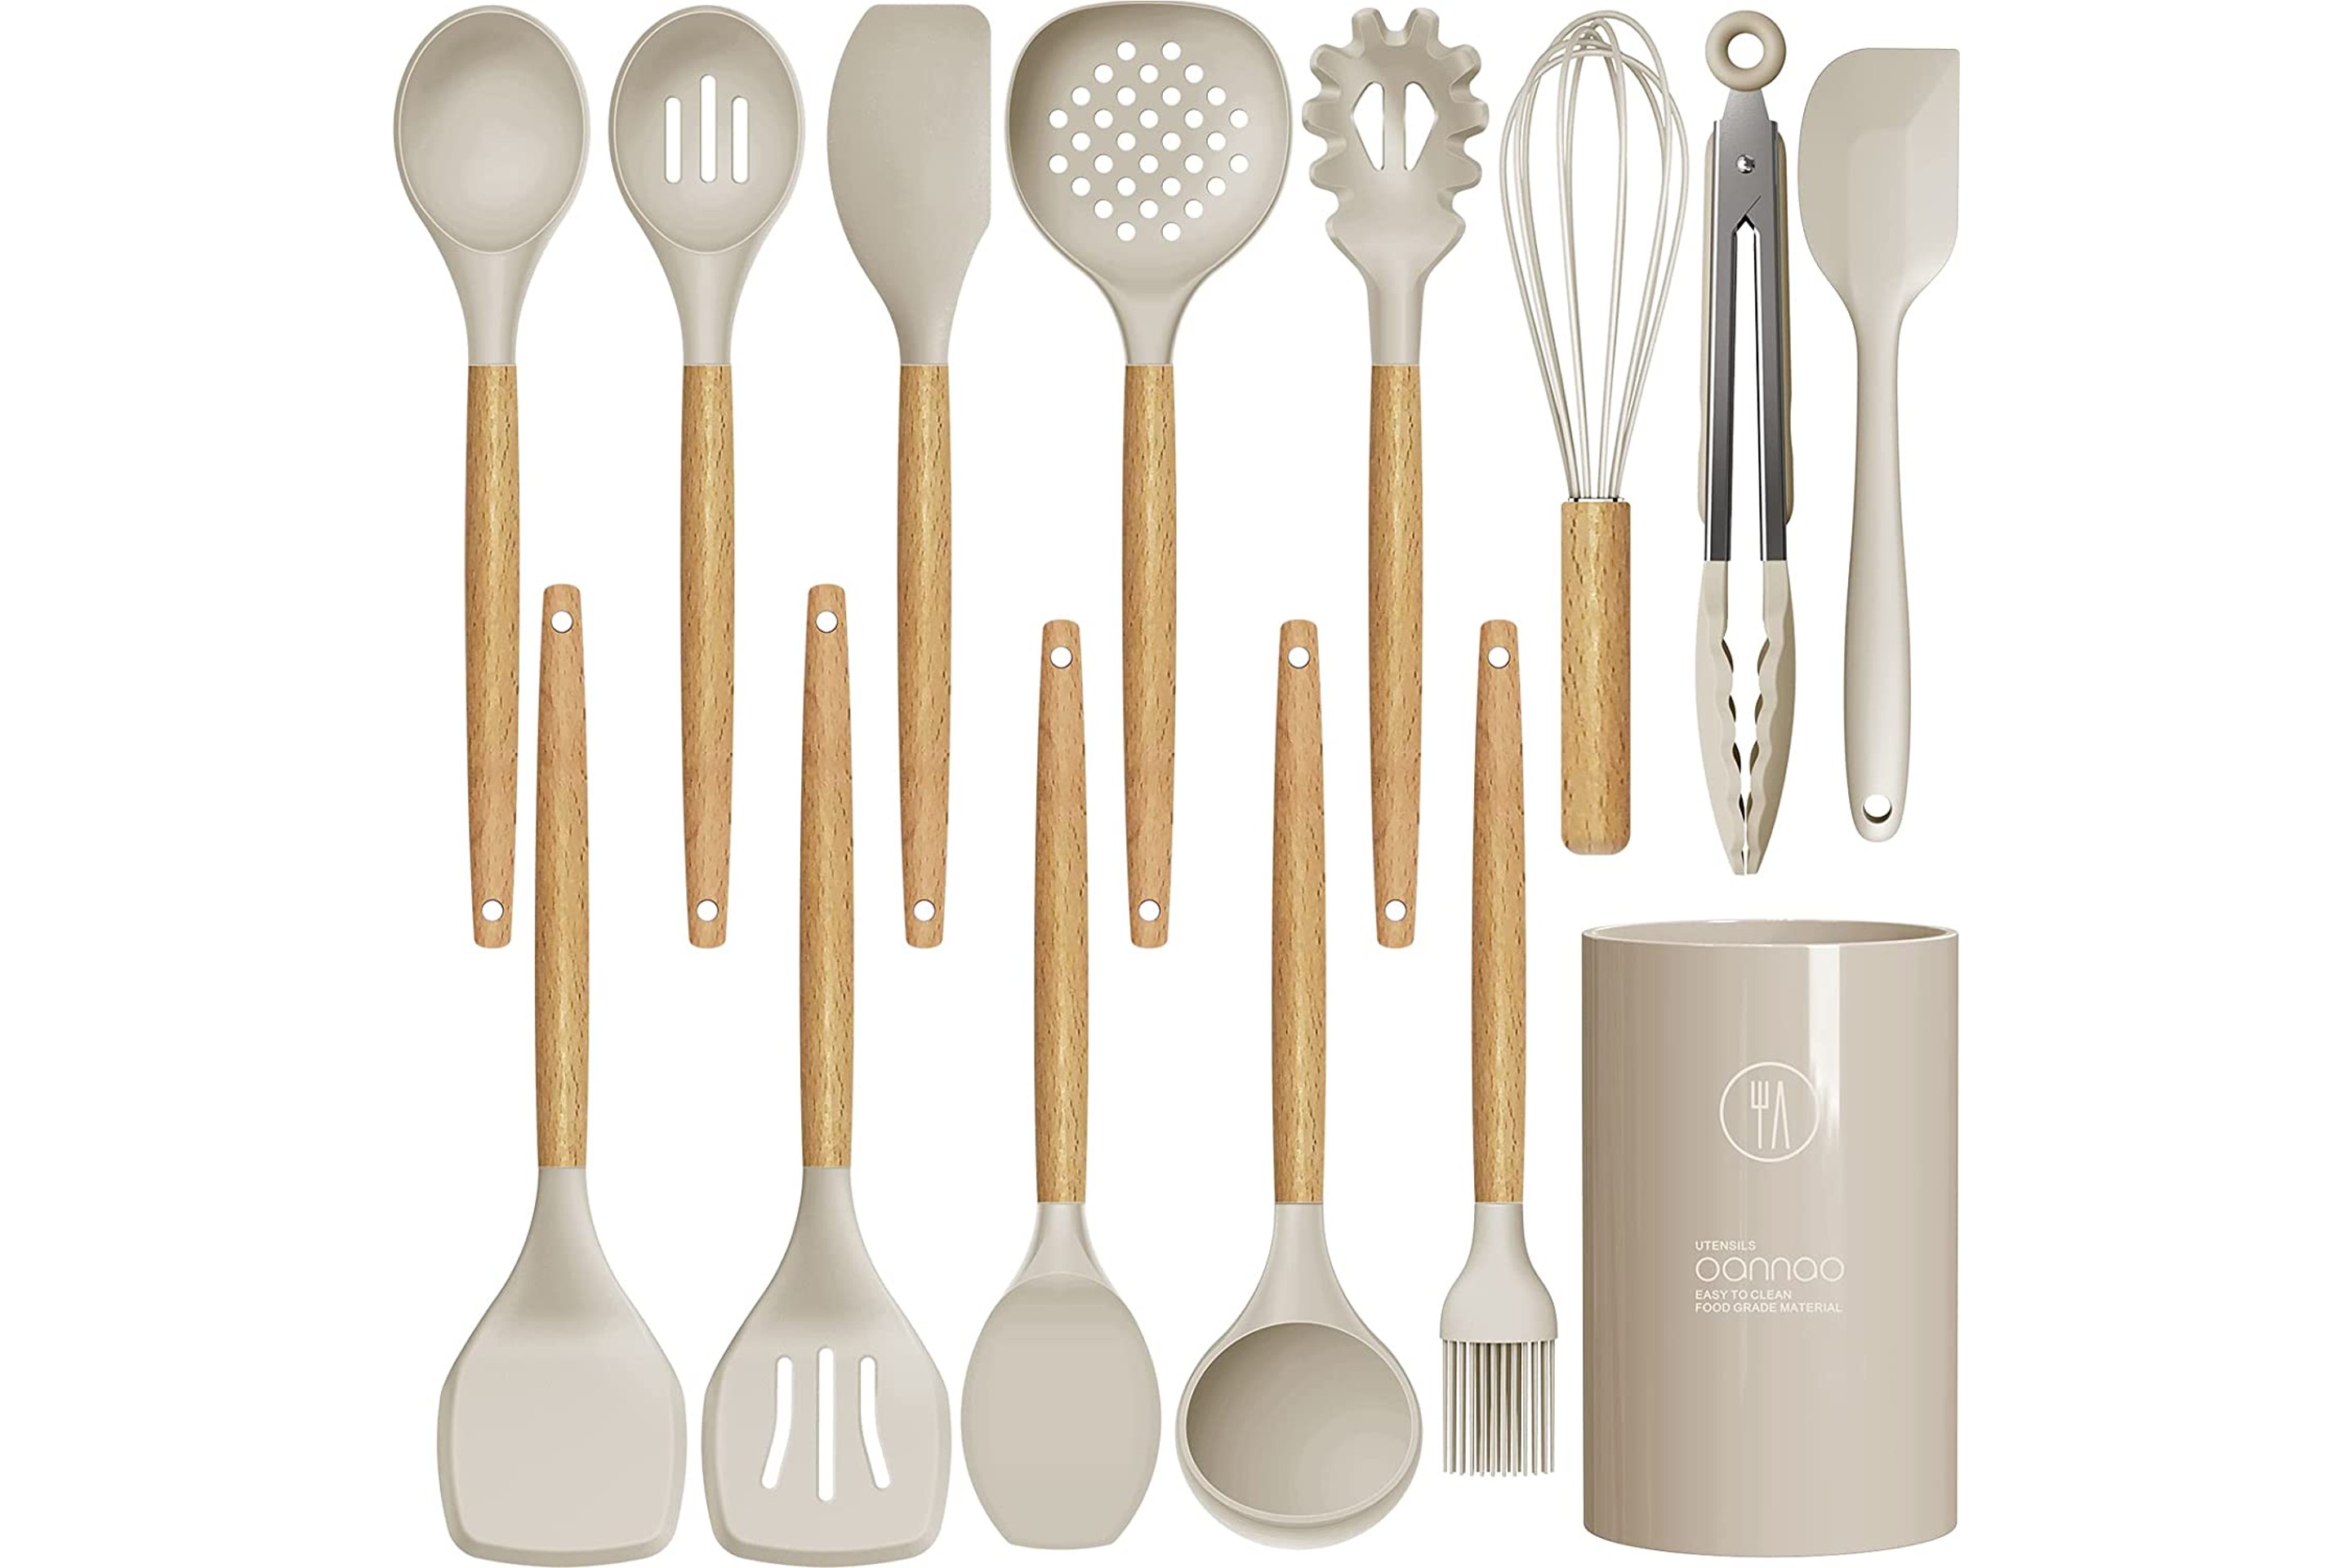 14-Piece Silicone Cooking Utensil Set